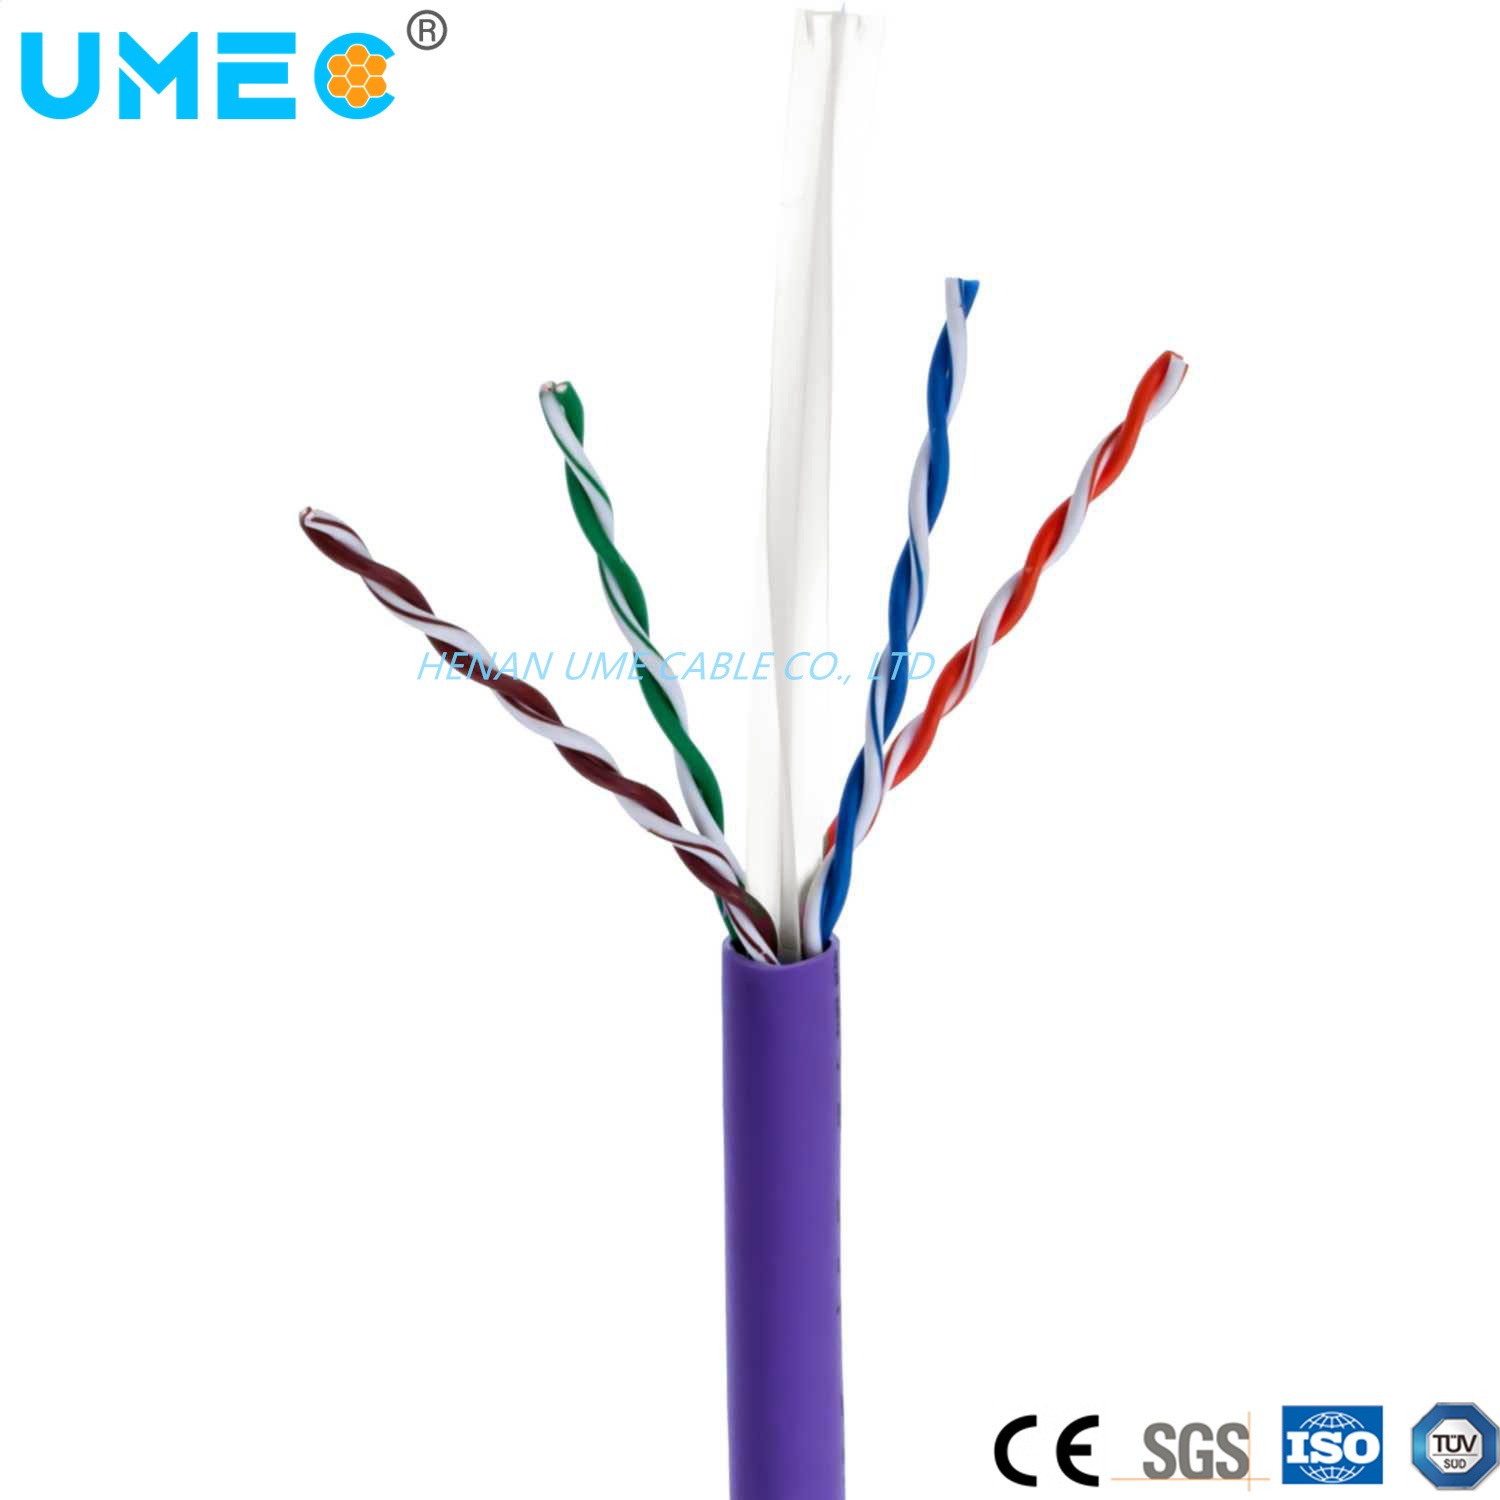 China Manufacturer Factory Price CAT6 Type Round UTP CAT6 LAN Network Cable Round CAT6 Cable 23AWG 24AWG 25AWG